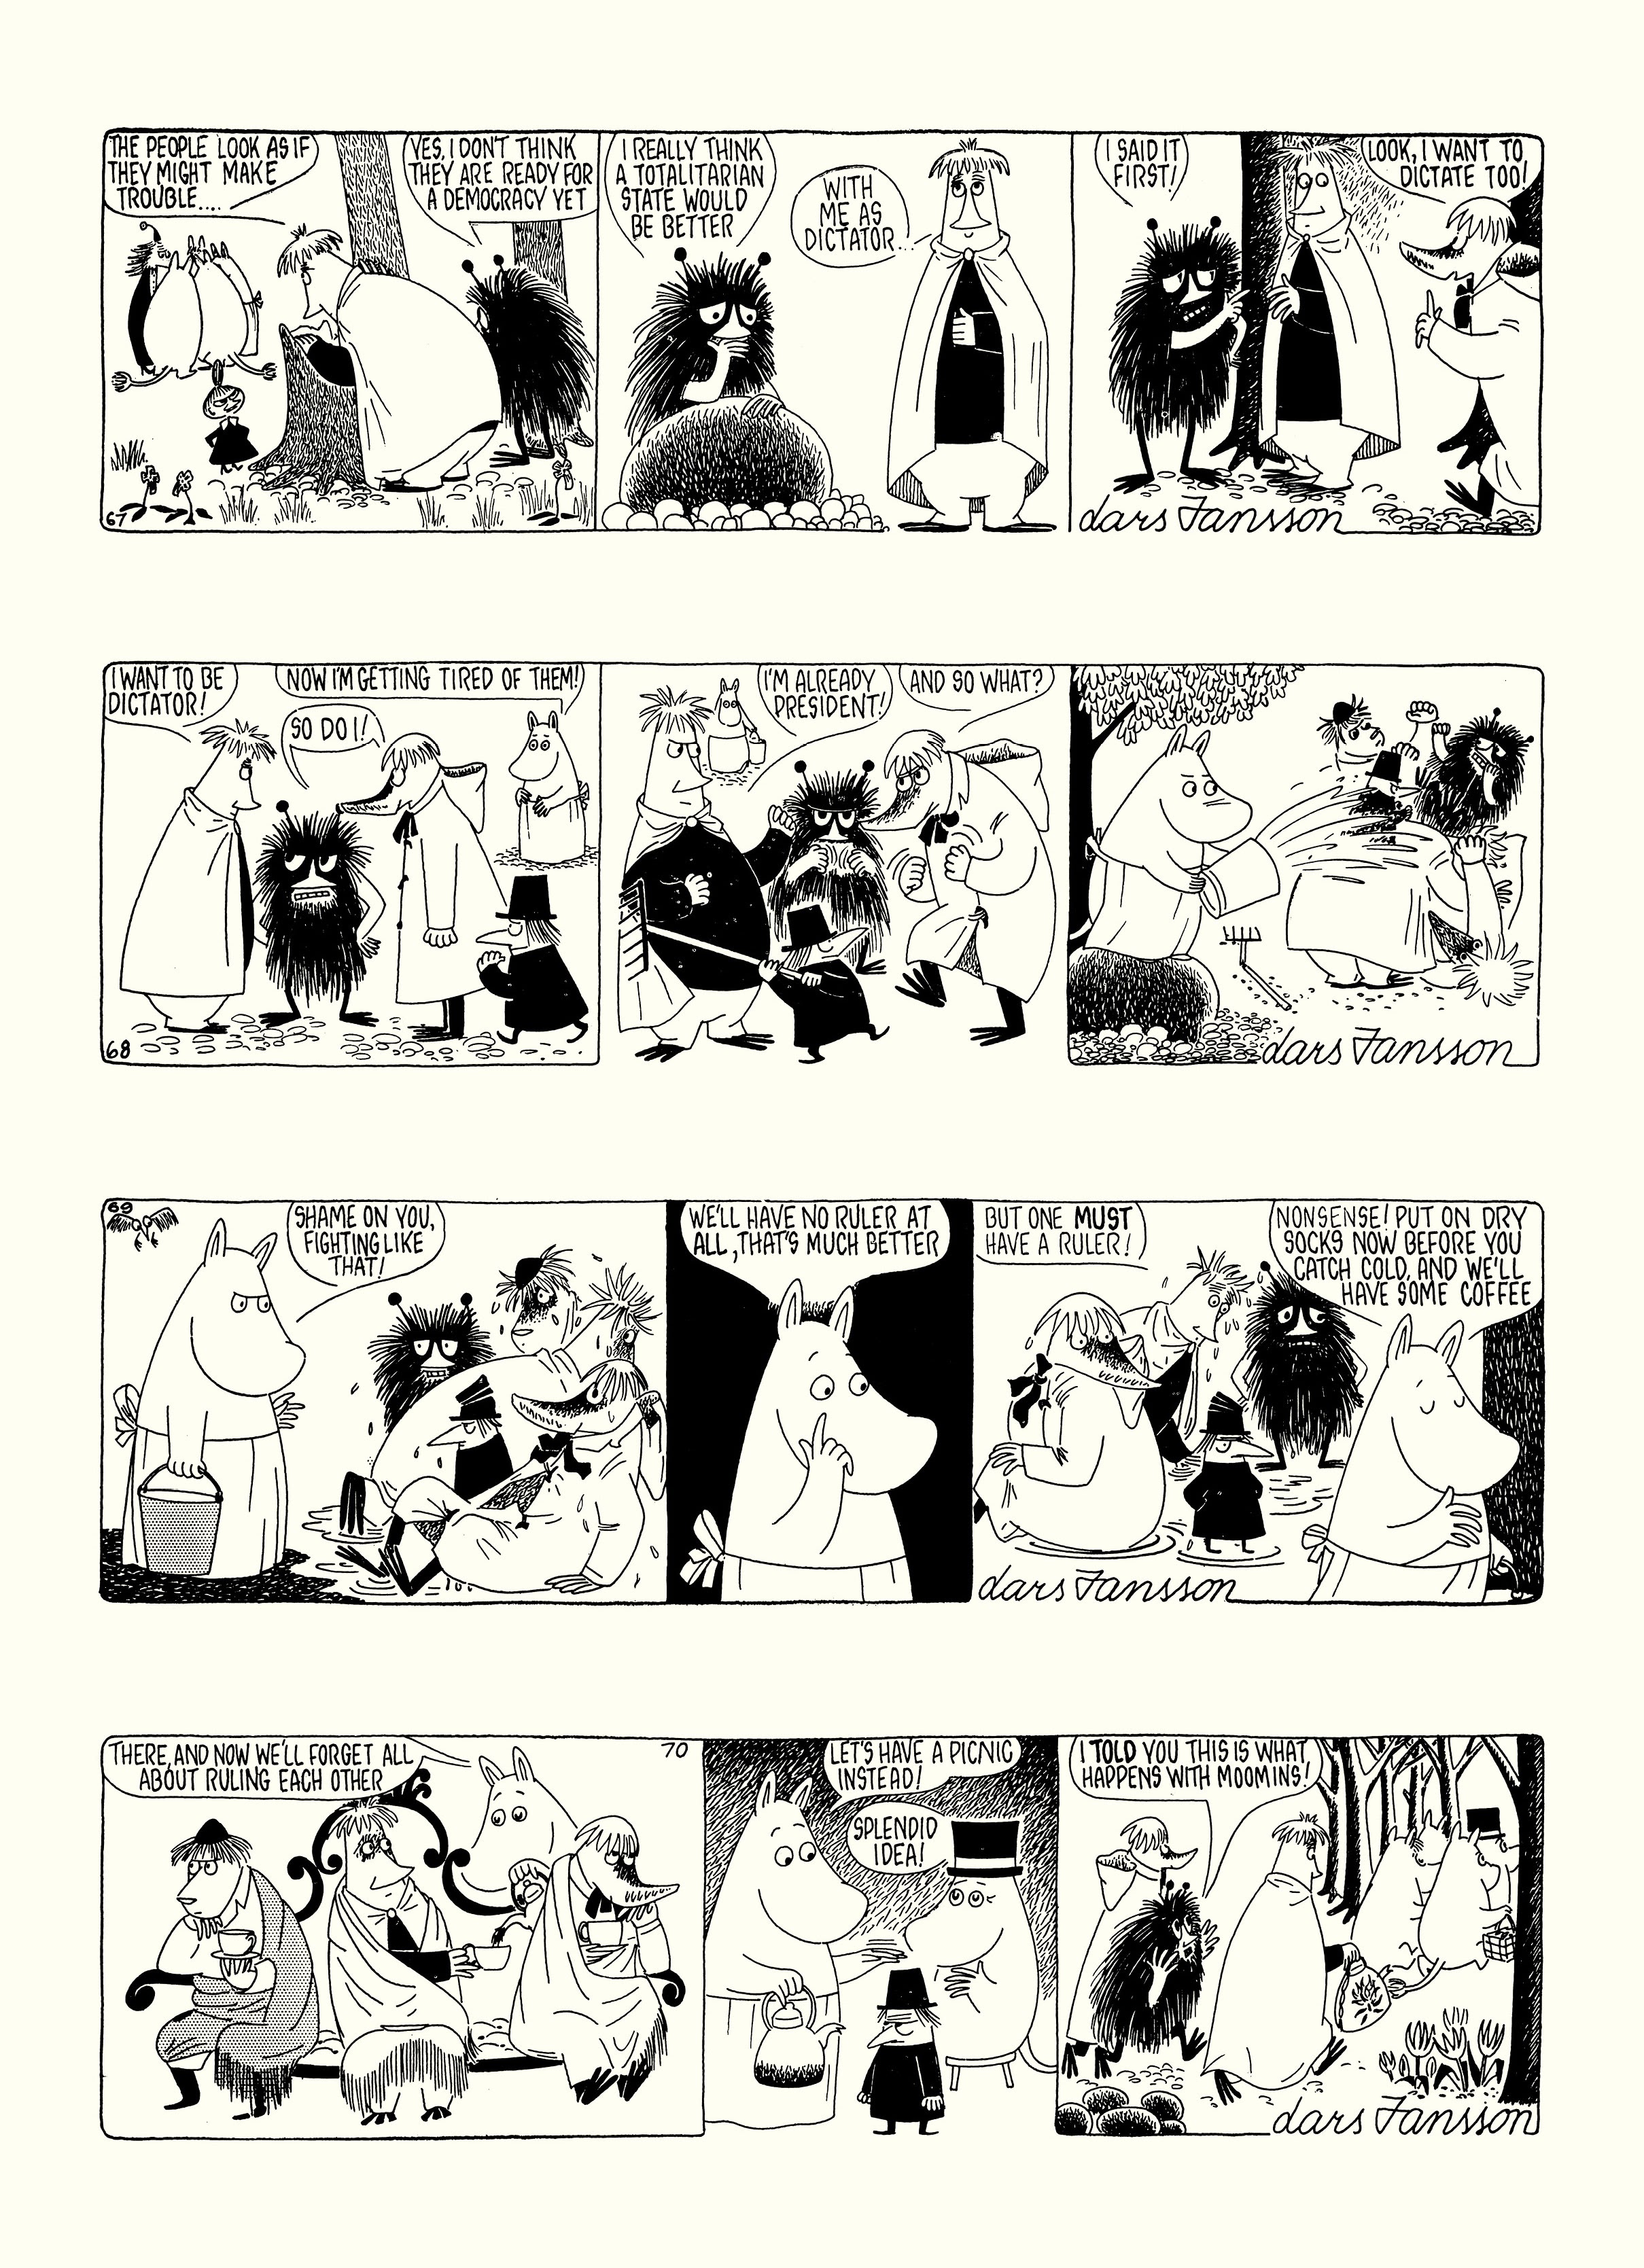 Read online Moomin: The Complete Lars Jansson Comic Strip comic -  Issue # TPB 7 - 23